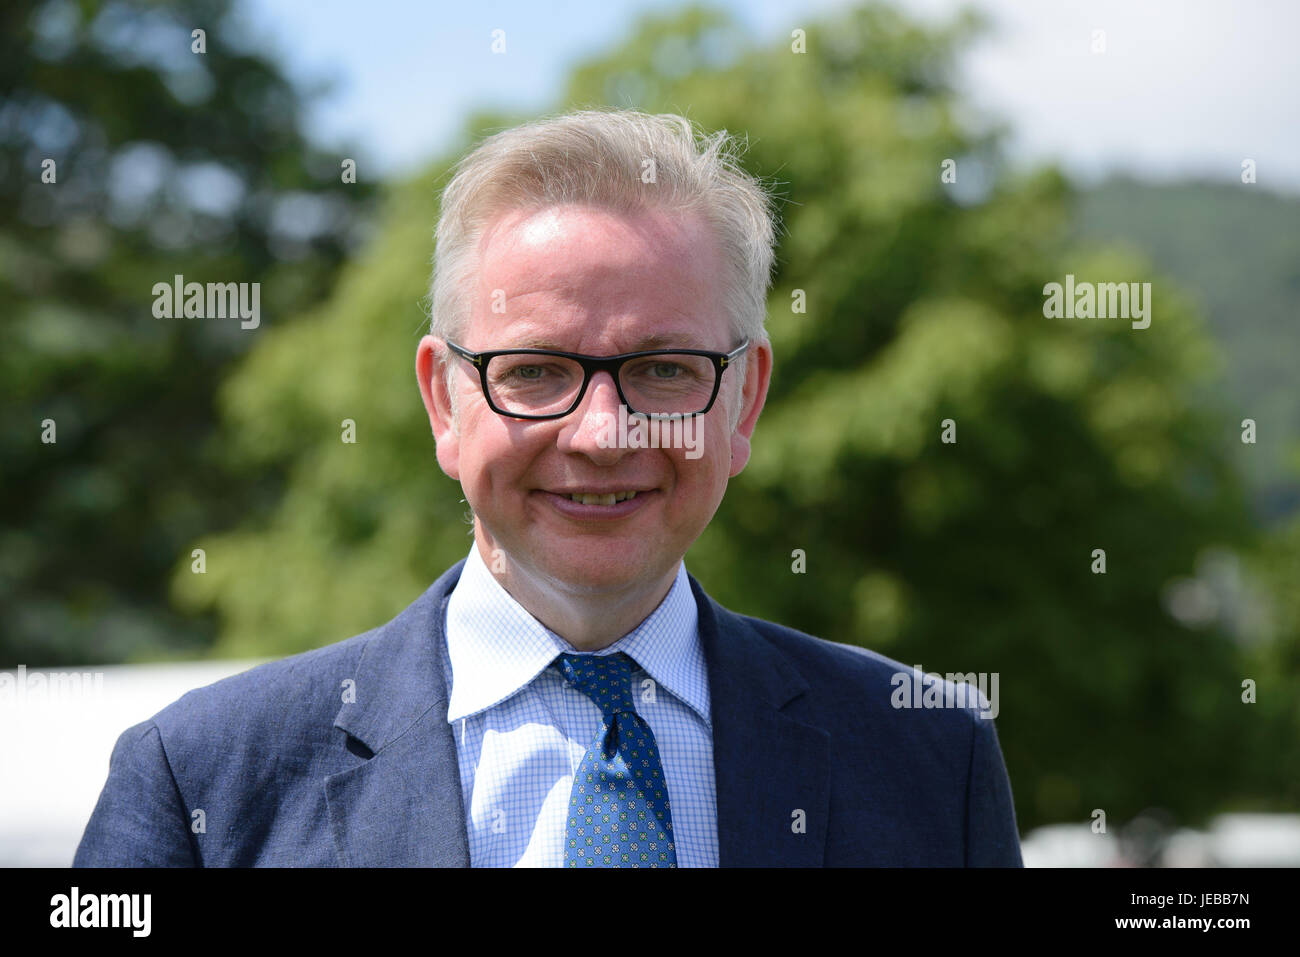 Michael Andrew Gove, a British Conservative politician, Secretary of State for Environment, Food and Rural Affairs. At the Royal Three Counties, Show, Stock Photo